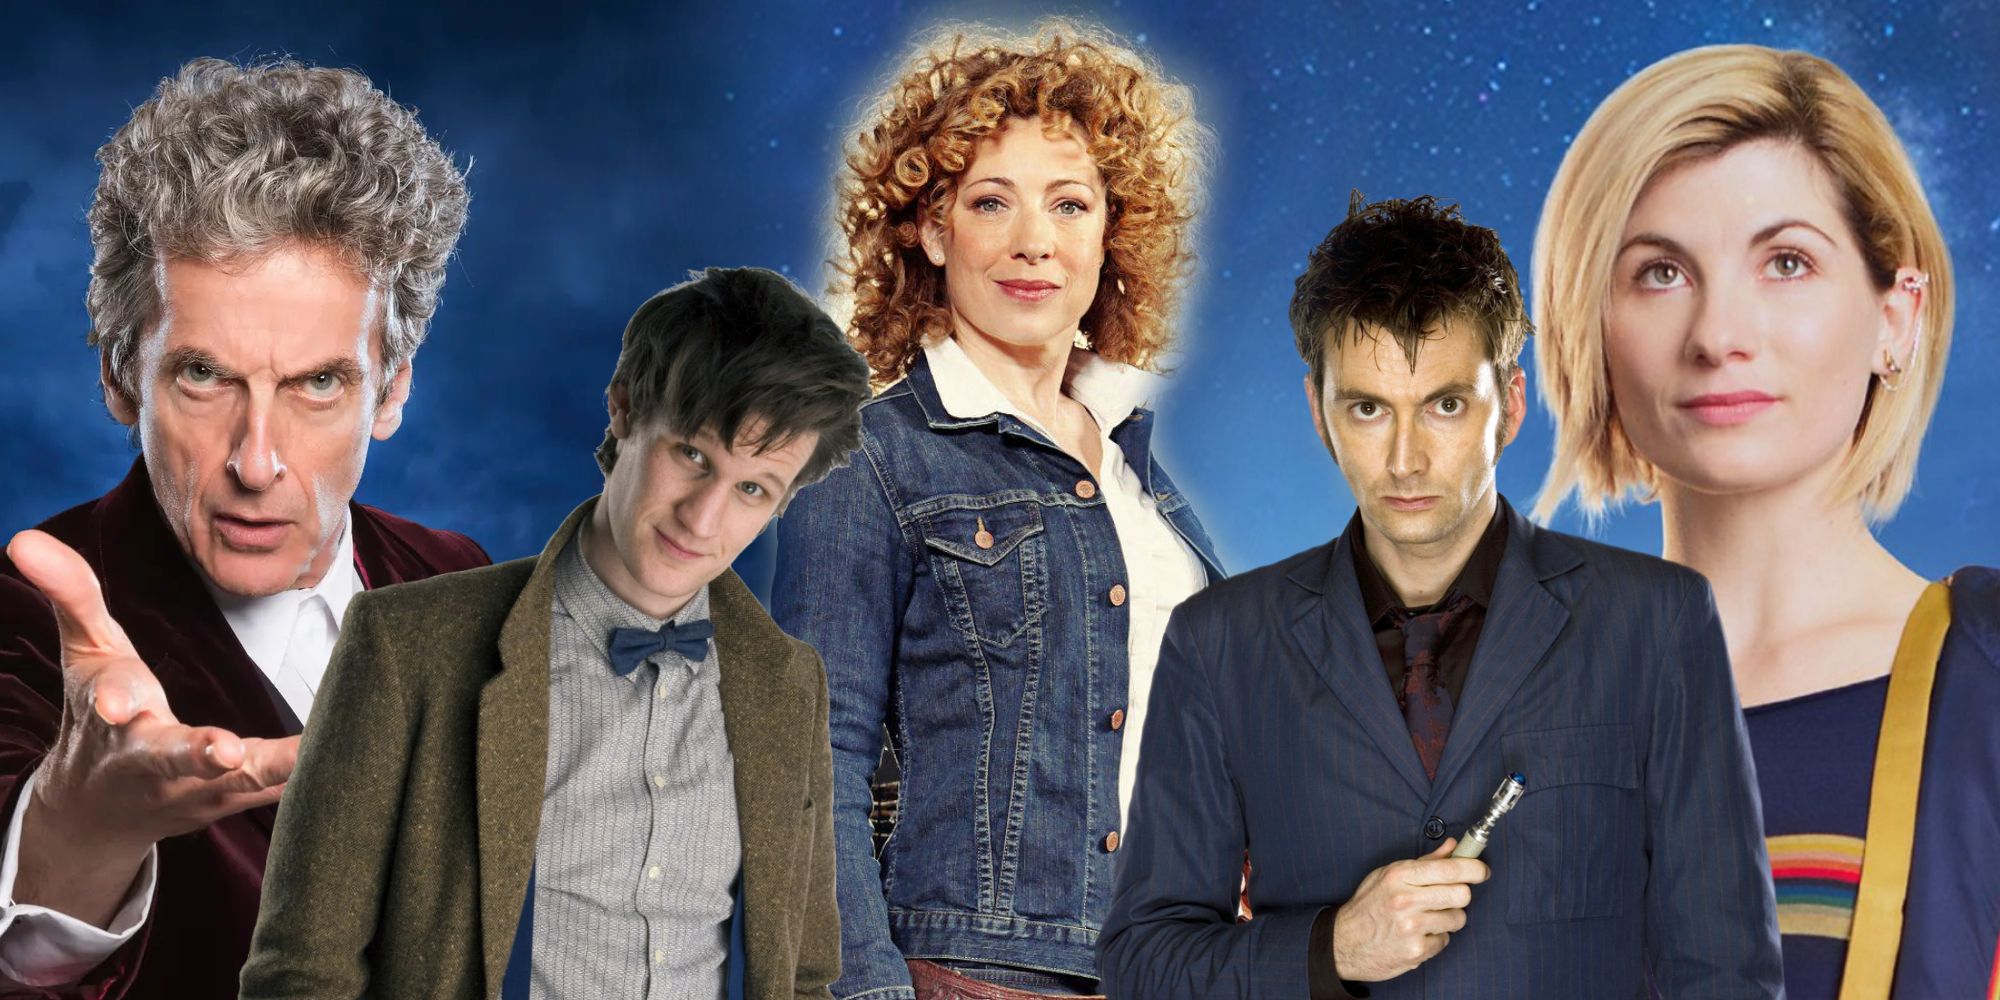 River Song, Twelfth Doctor, Eleventh Doctor, Tenth Doctor, and Thirteenth Doctor